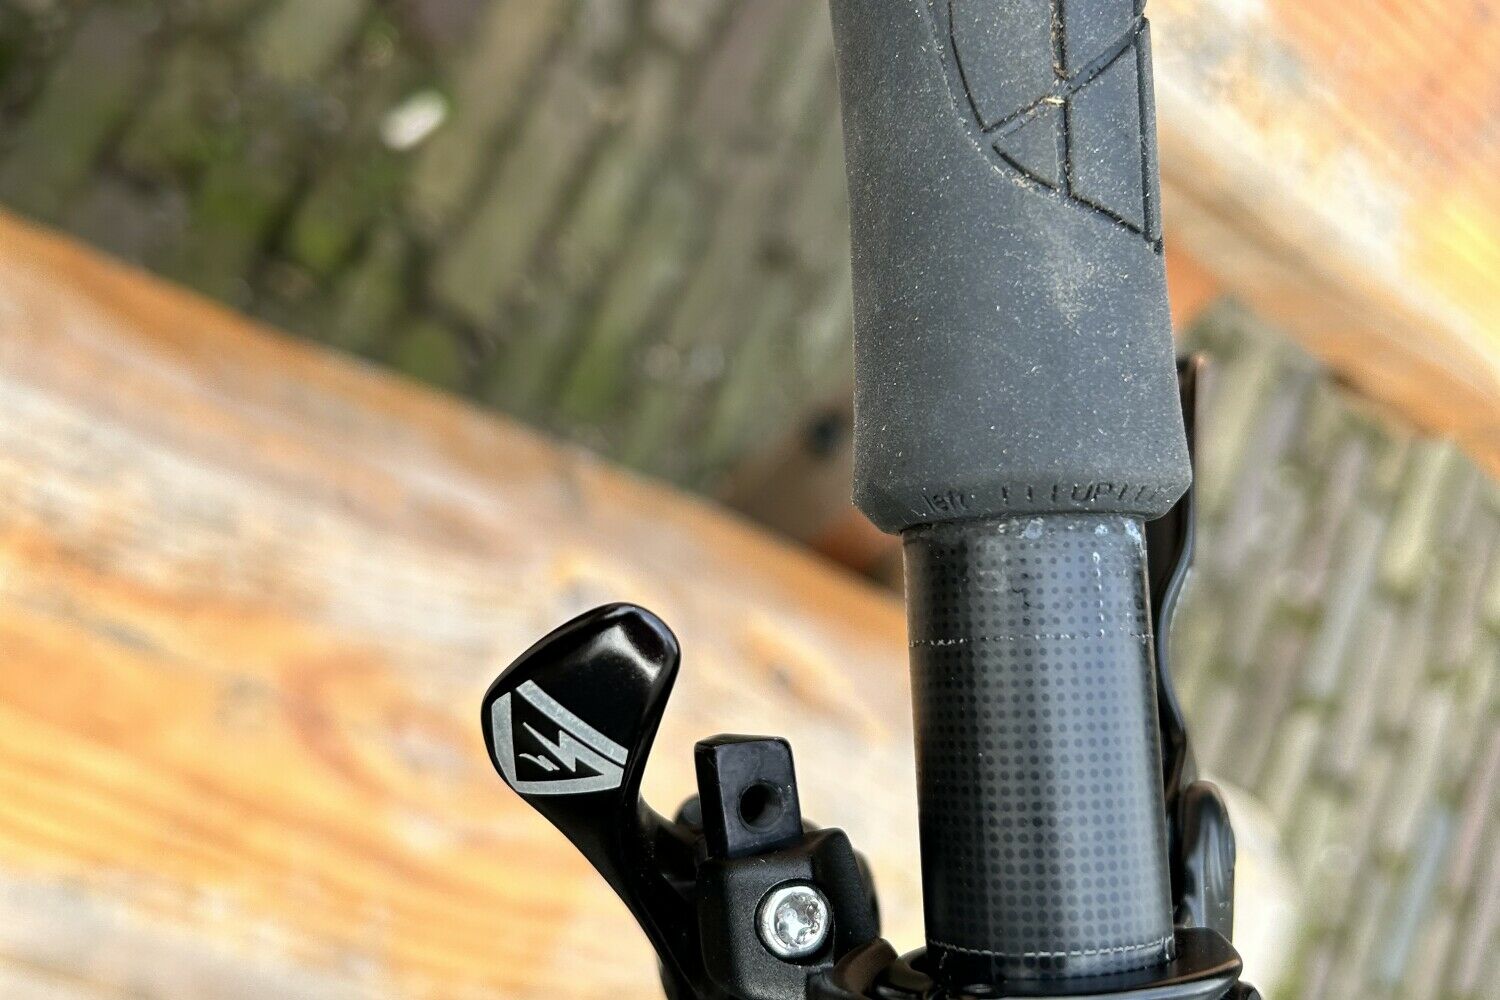 Specialized Camber Elite